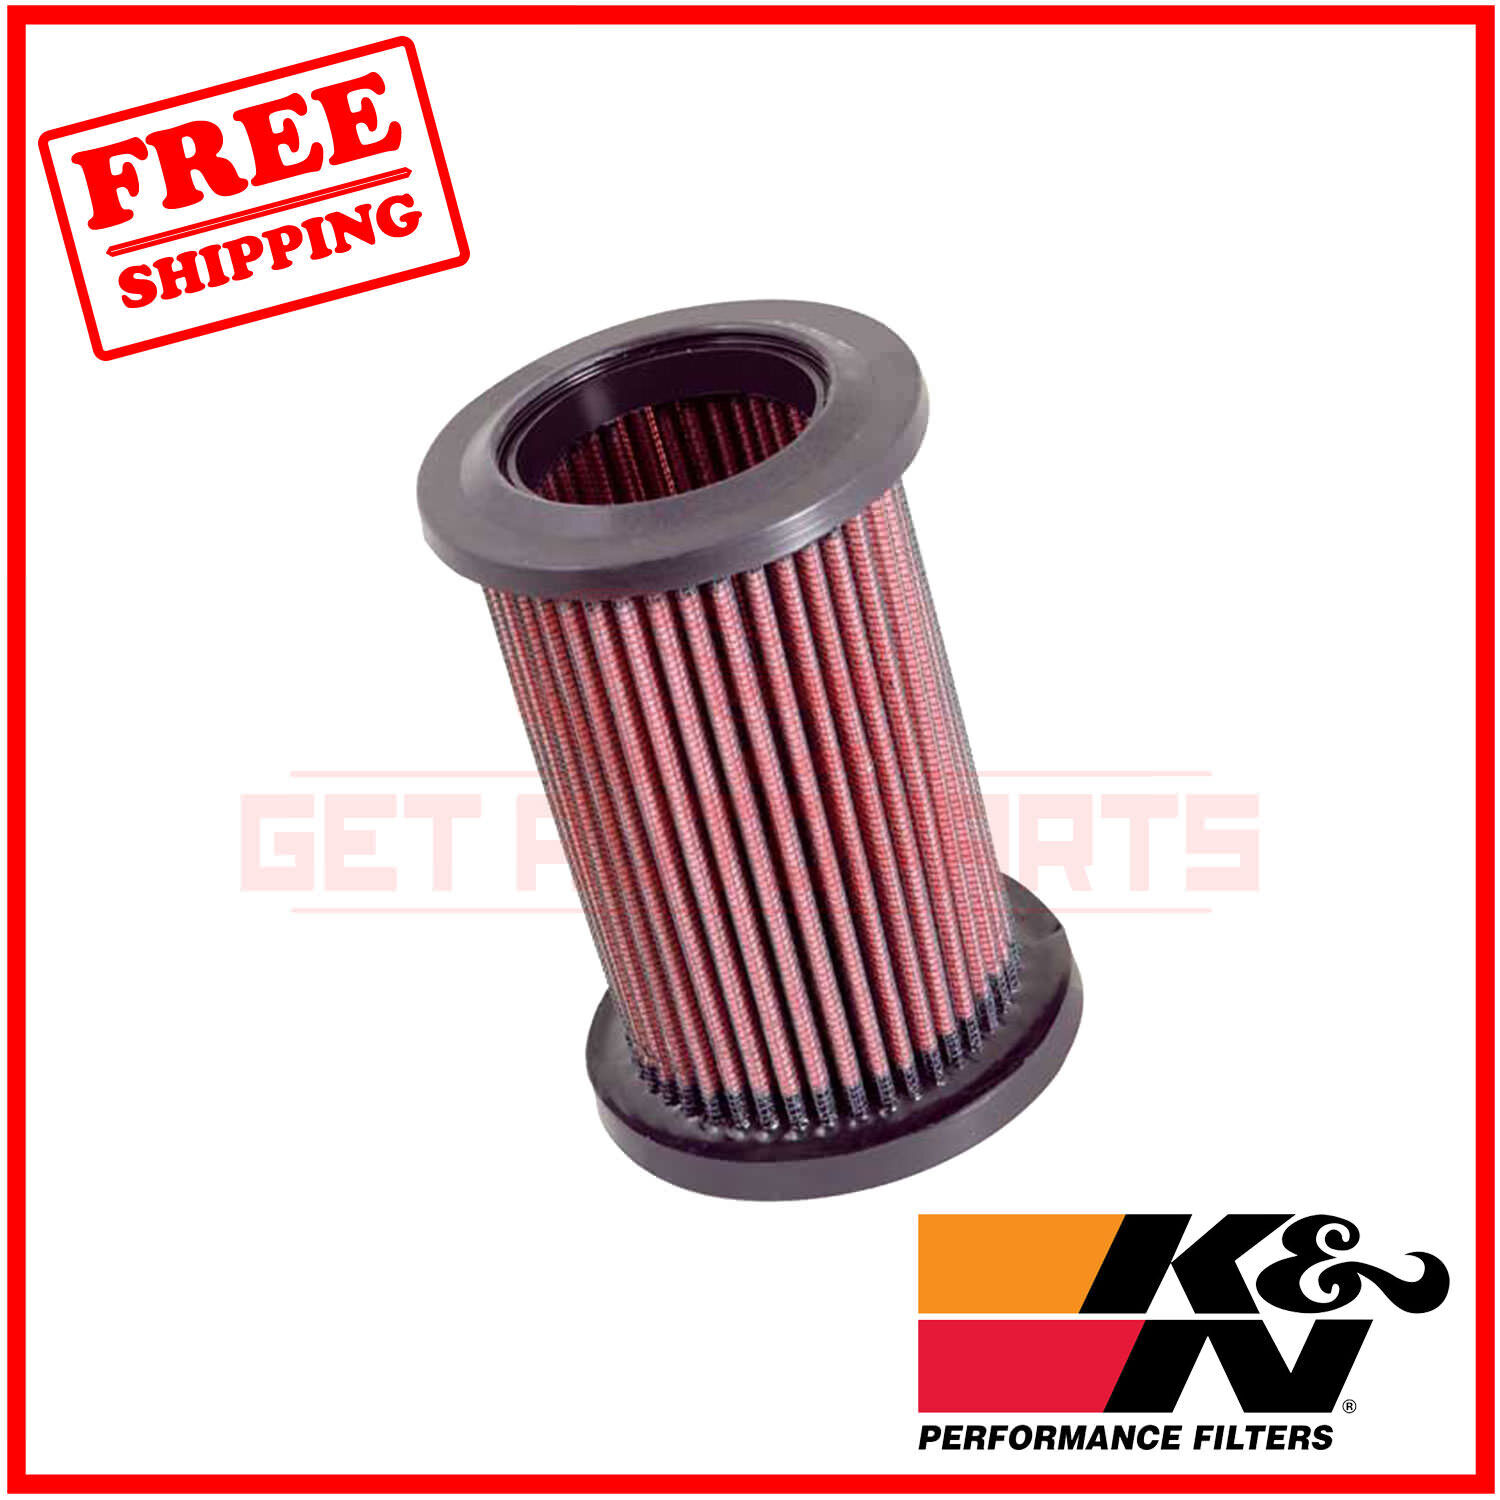 K&N Replacement Air Filter for Ducati Hypermotard 1100 EVO SP 2010-2012